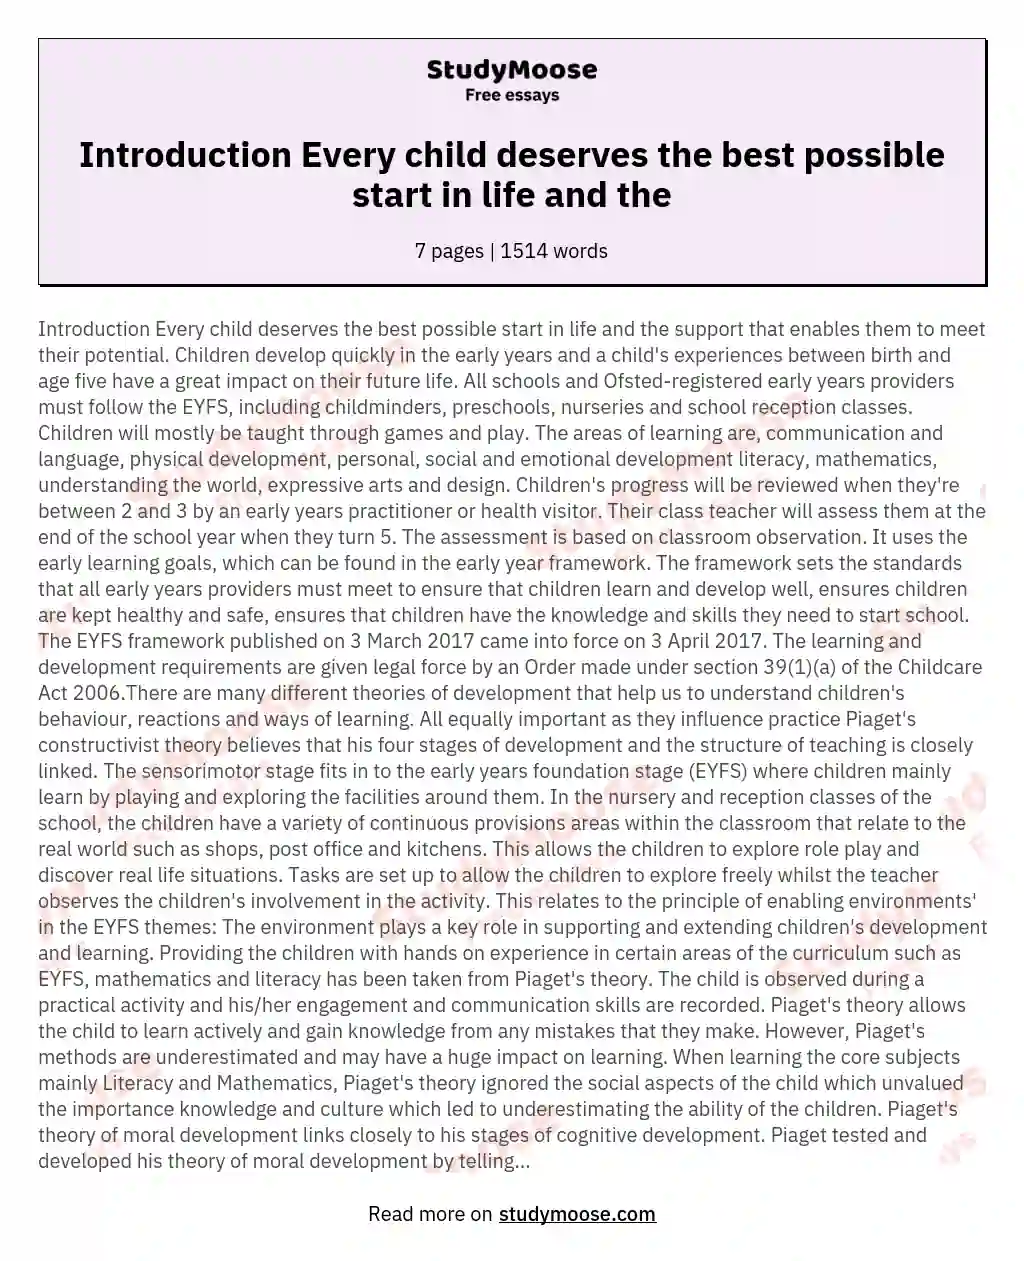 Introduction Every child deserves the best possible start in life and the